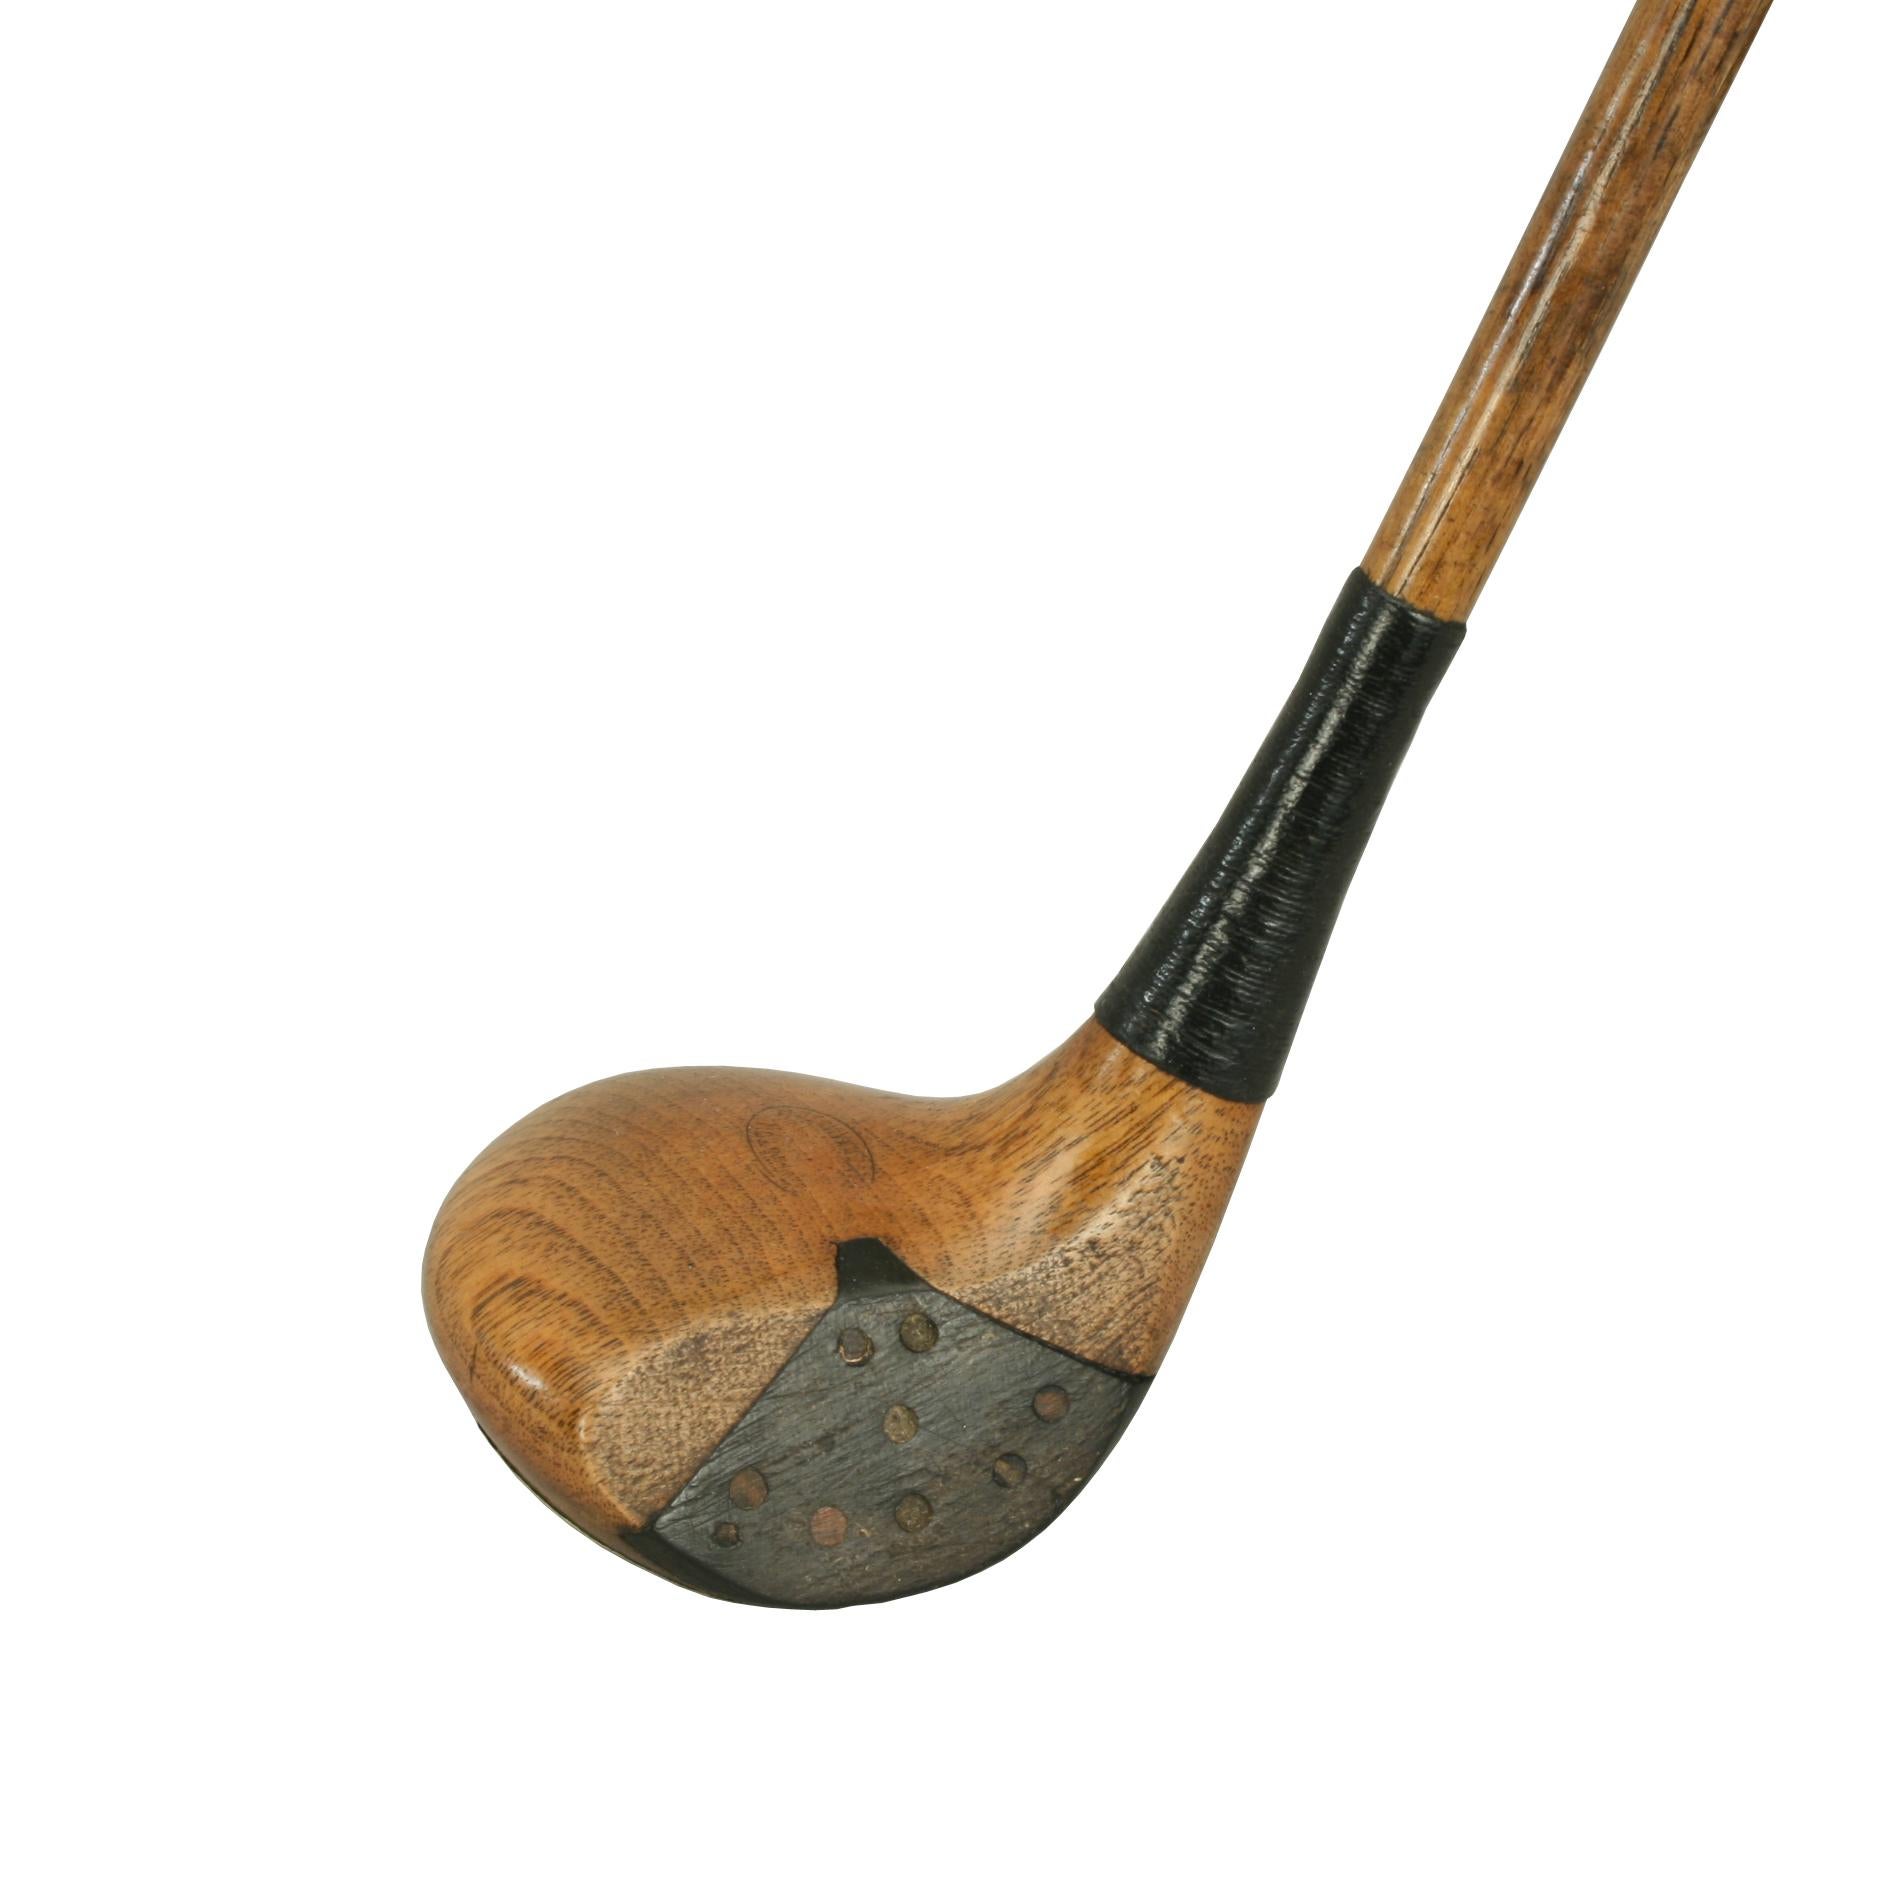 Antique Hickory Golf Club, Brassie.
A beautiful persimmon wood Brassie with hickory shaft. The club head is with full brass sole plate, fibre face insert with wooden pegs and lead weight to the rear. The head has an approximate 21° loft. The makers